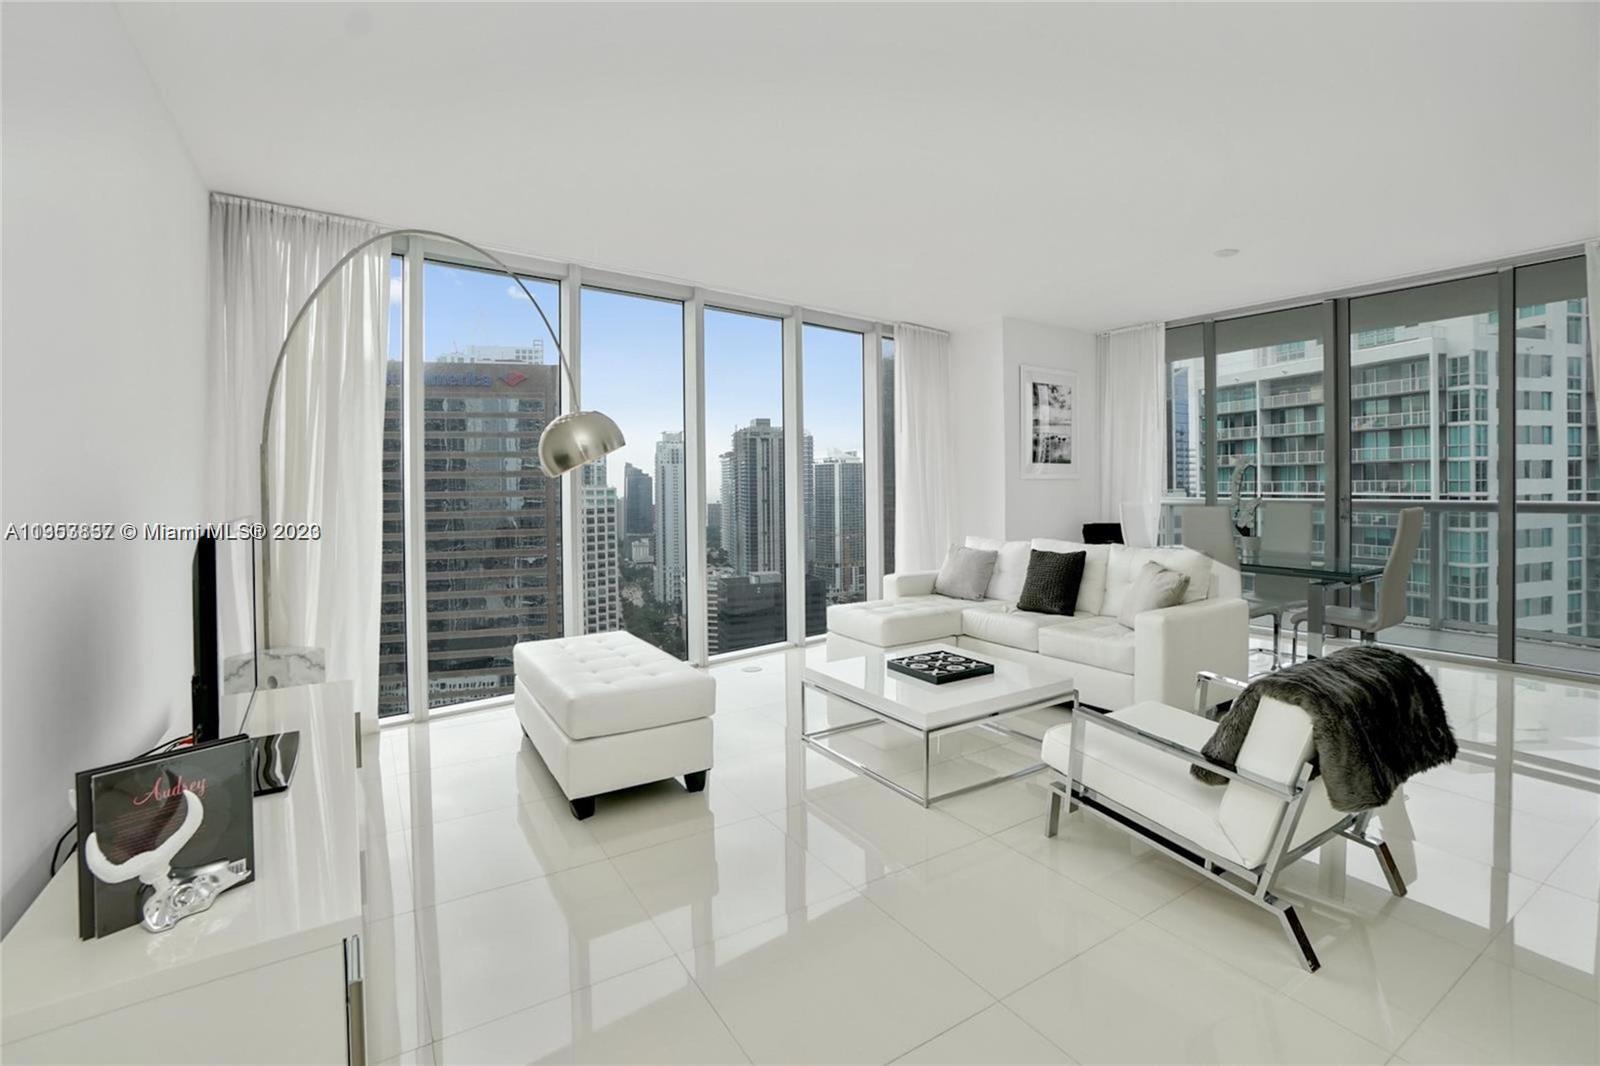 2/2 CORNER UNIT IN ONE OF THE BEST LUXURY BUILDINGS IN BRICKELL, INCOME PRODUCING PROPERTY. GREAT IN